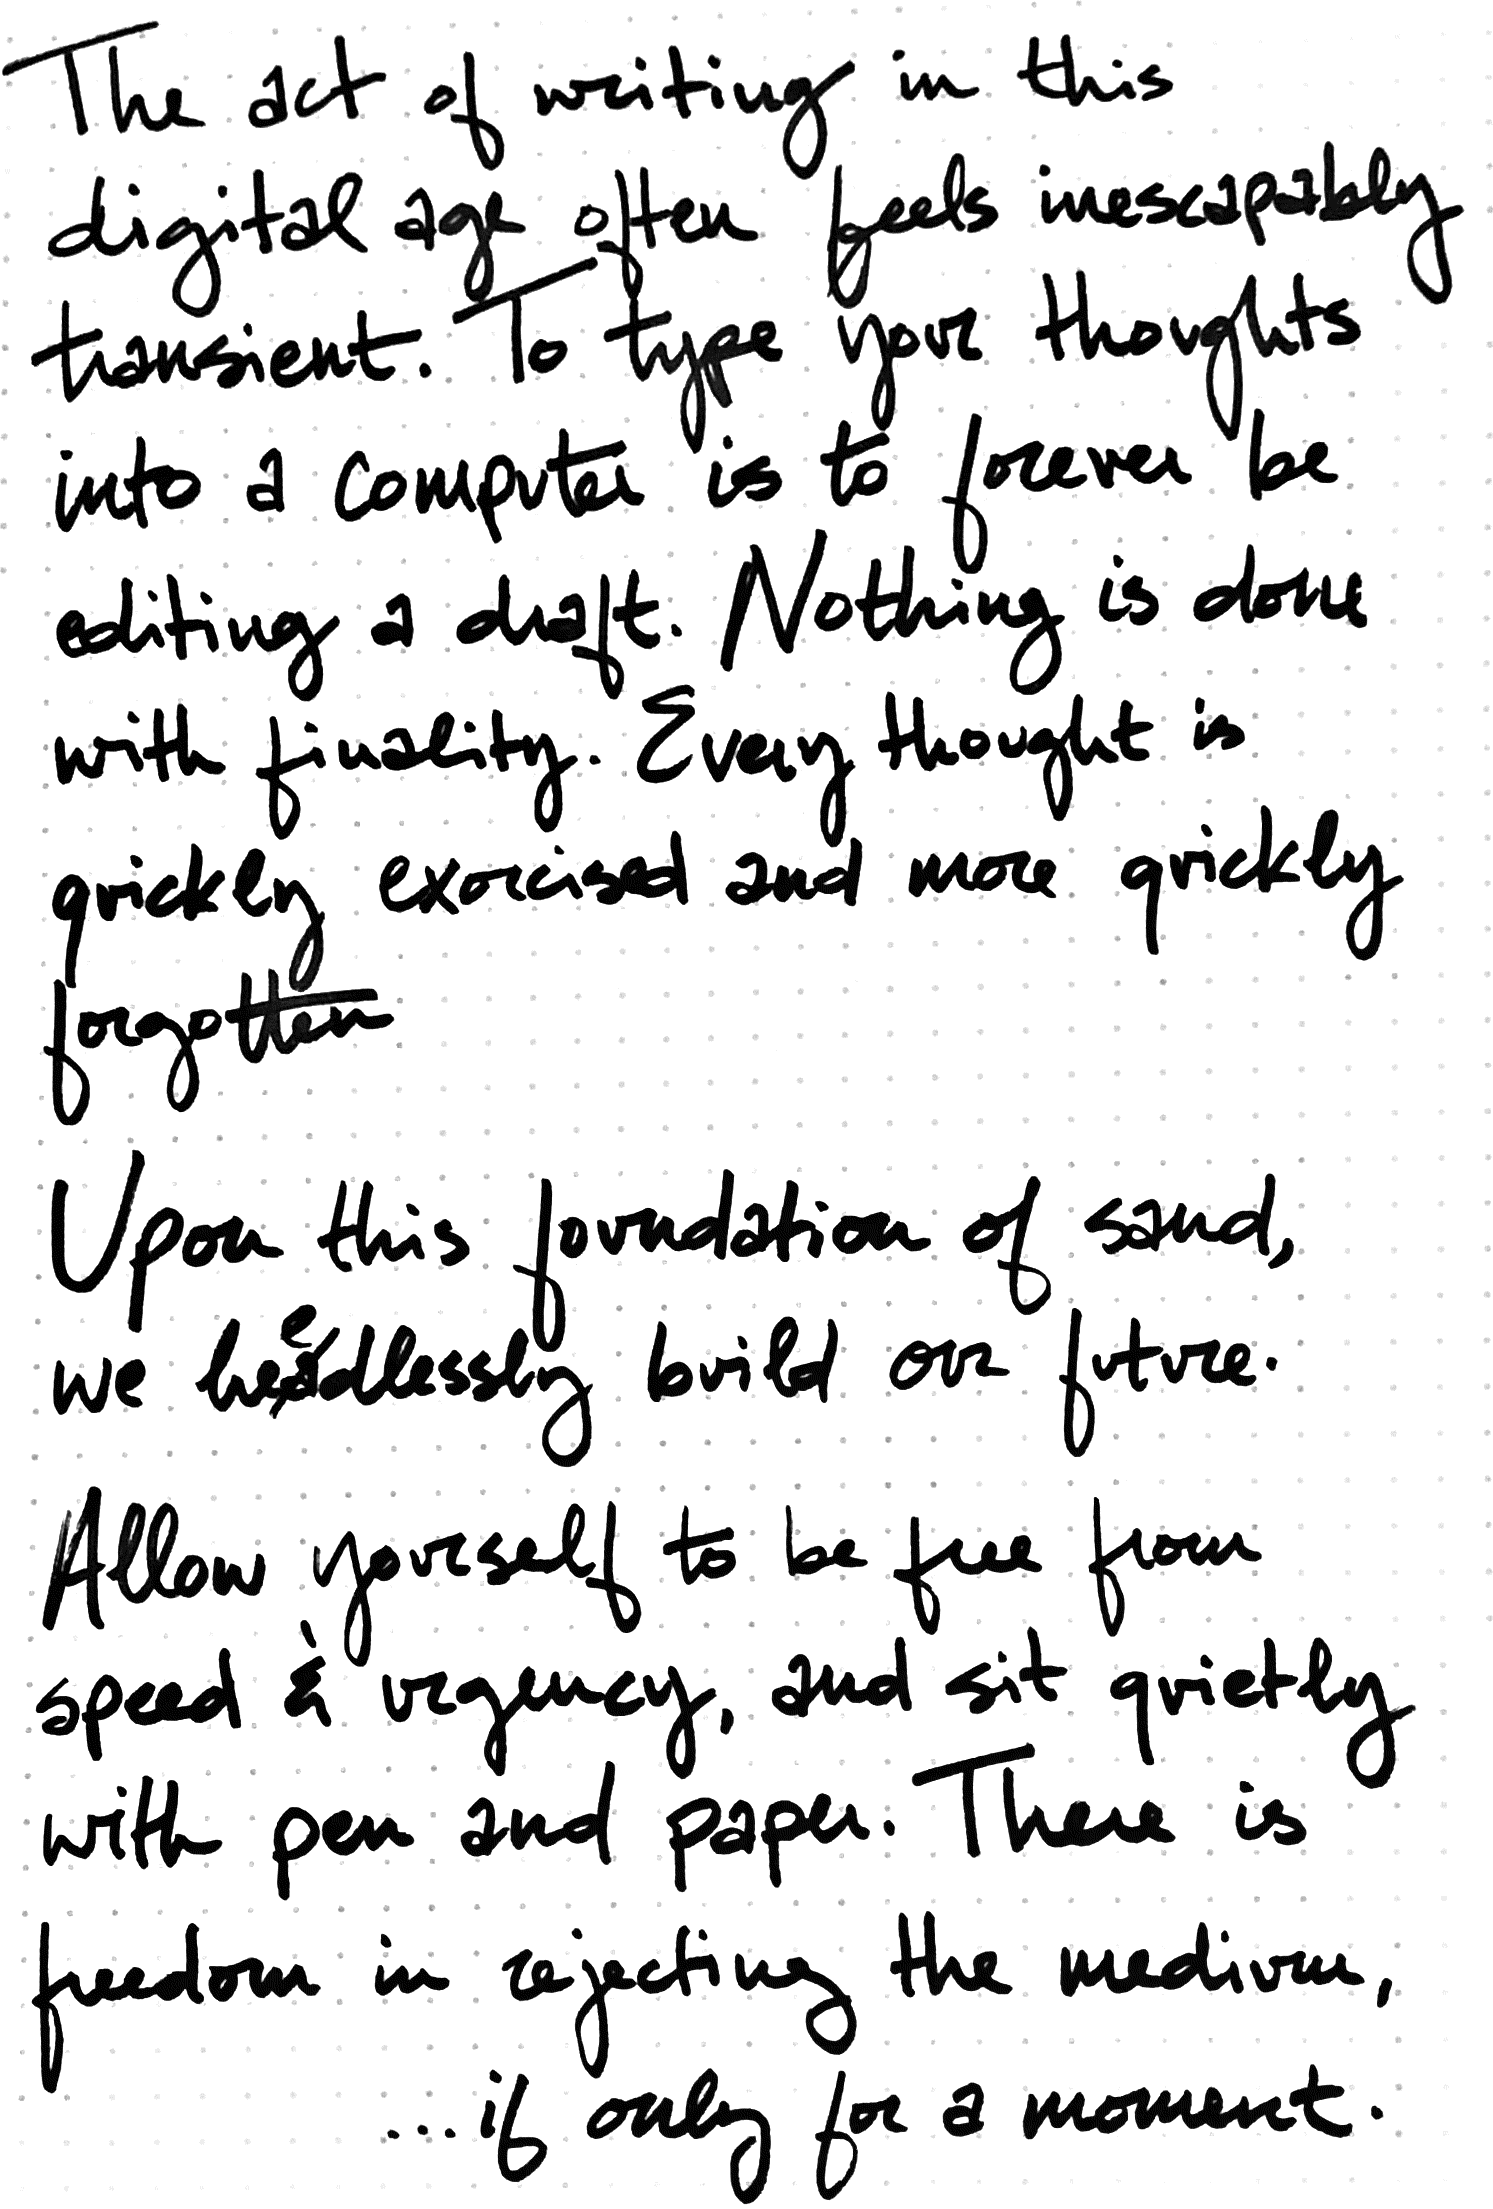 An image of a handwritten note that reads: 'The act of writing in this digital age often feels inescapably transient. To type your thoughts into a computer is to forever be editing a draft. Nothing is done with finality. Every thought is quickly exorcised and quickly forgotten. Upon this foundation of sand, we heedlessly build our future. Allow yourself to be free from speed and urgency, and sit quietly with pen and paper. There is freedom in rejecting the medium, ...if only for a moment.'